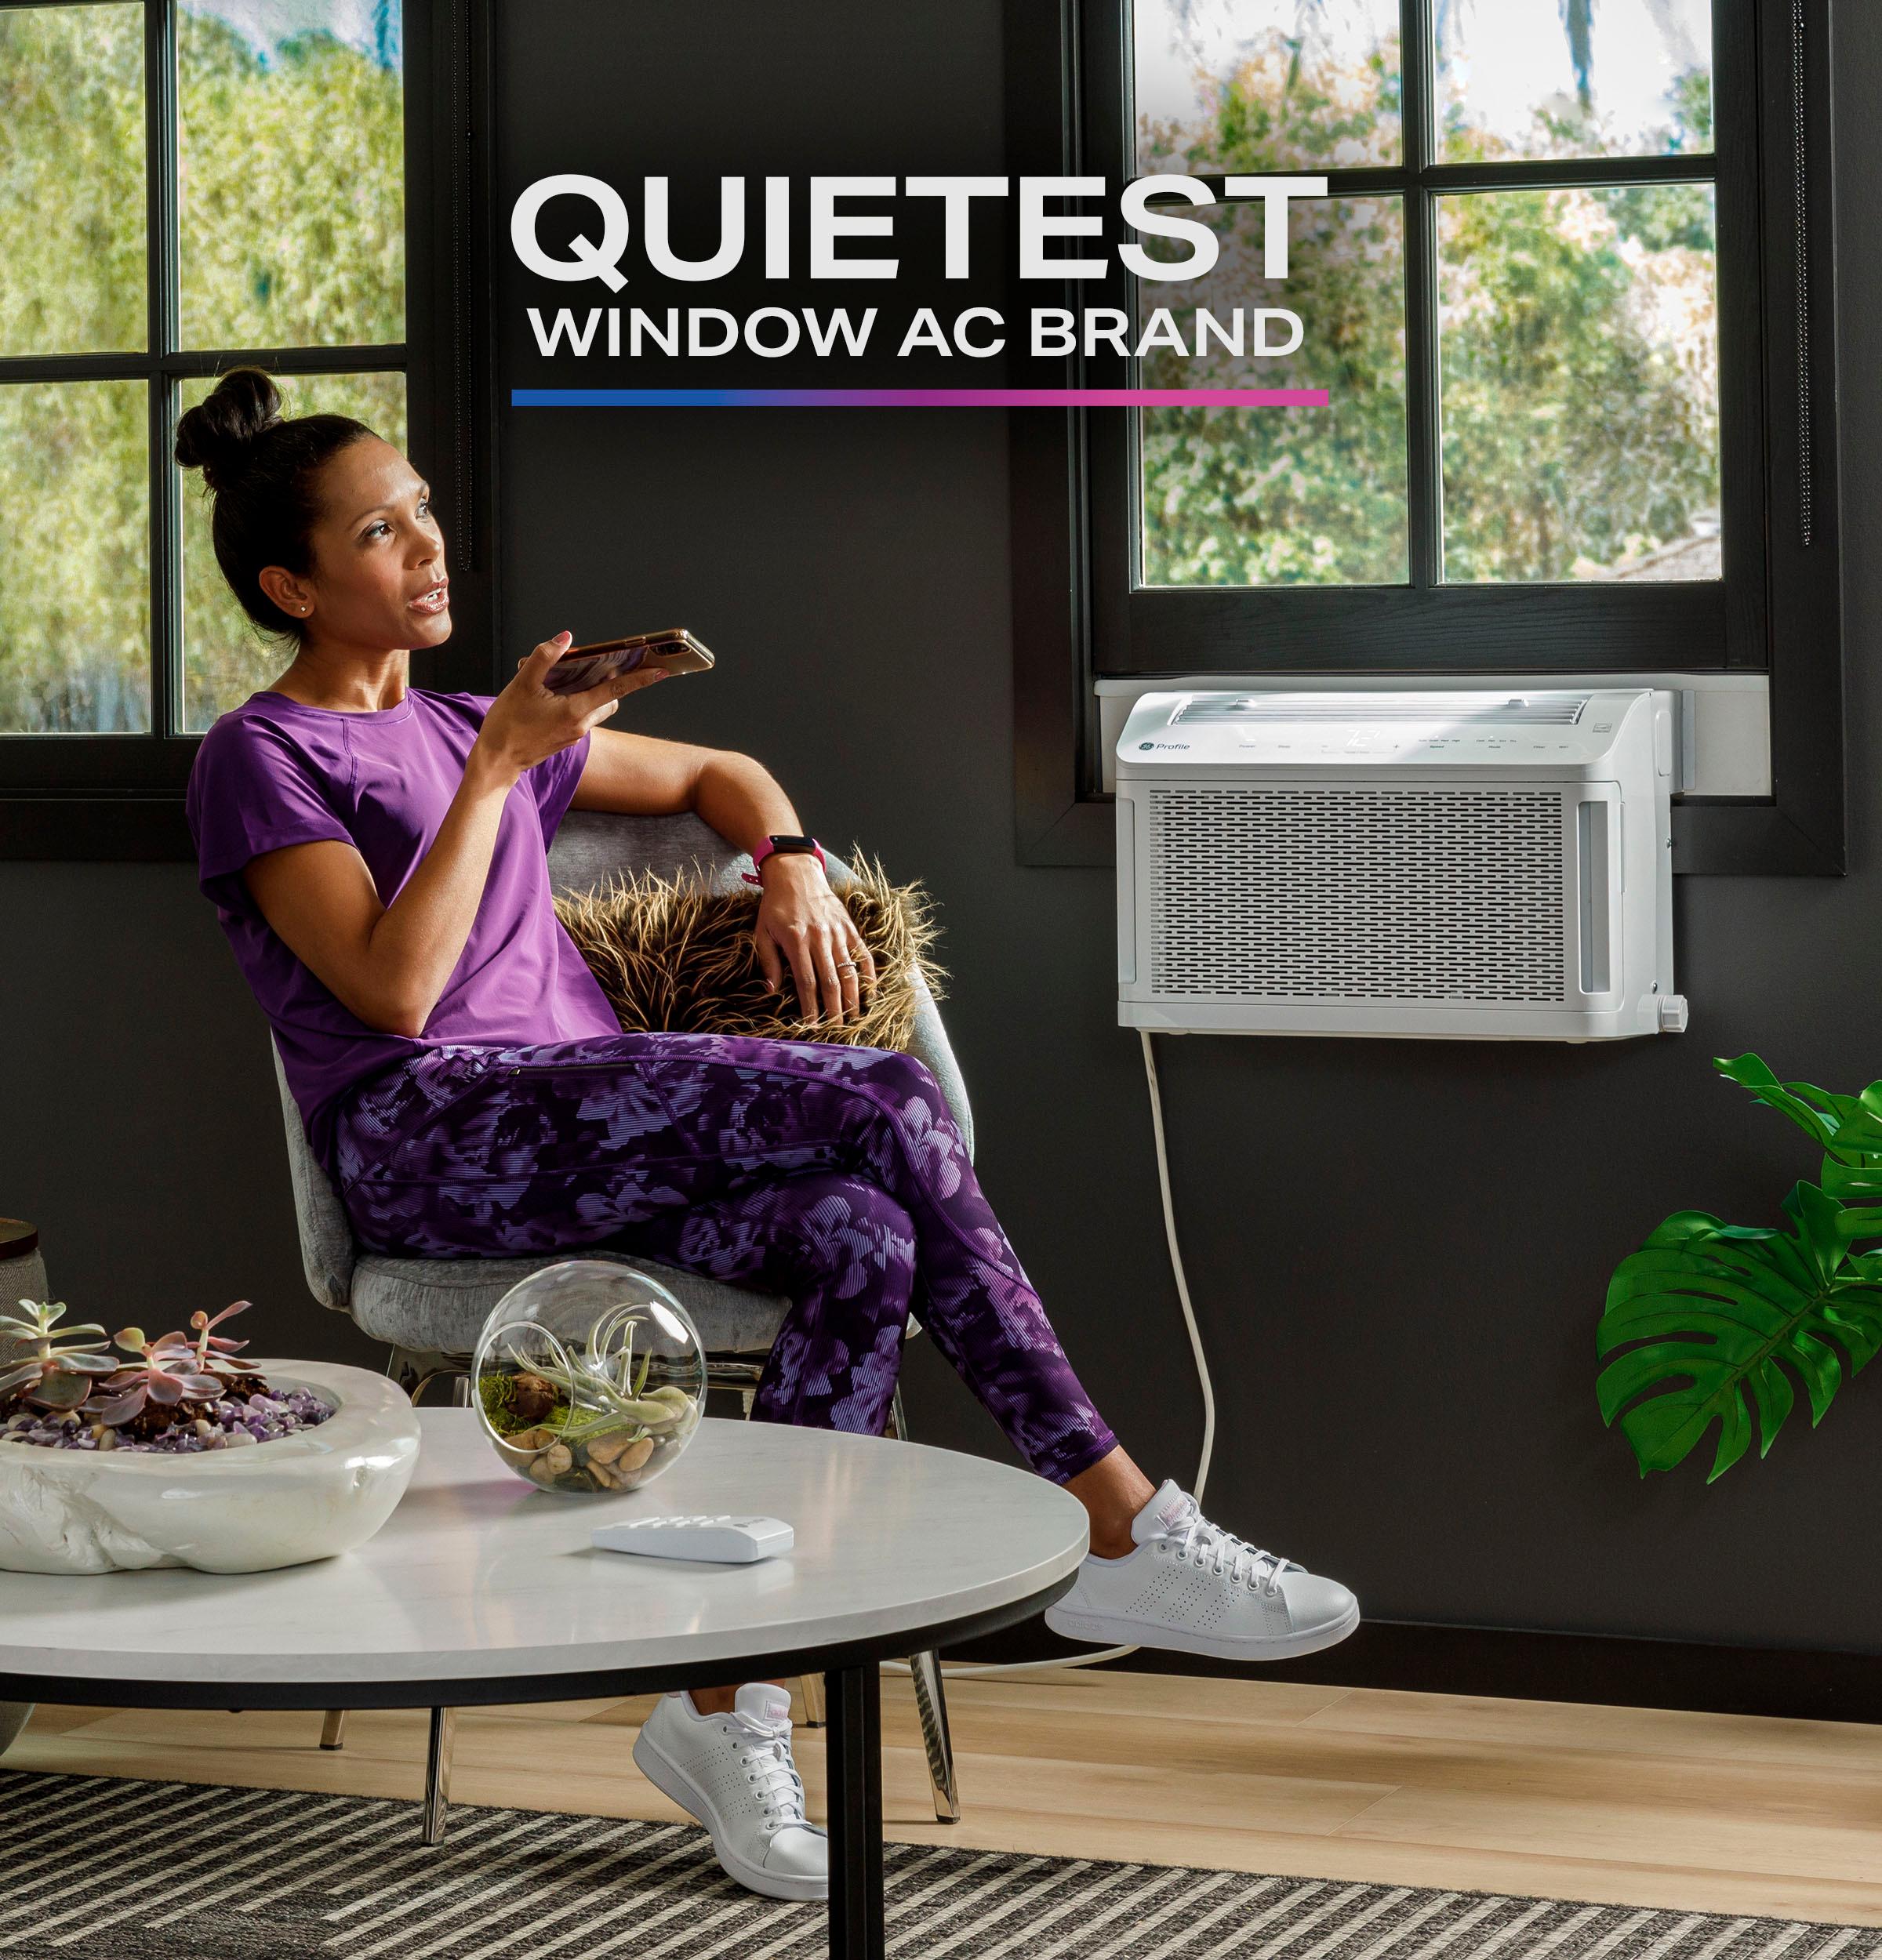 GE Profile ClearView™ ENERGY STAR® 12,200 BTU Inverter Smart Ultra Quiet Window Air Conditioner for Large Rooms up to 550 sq. ft.